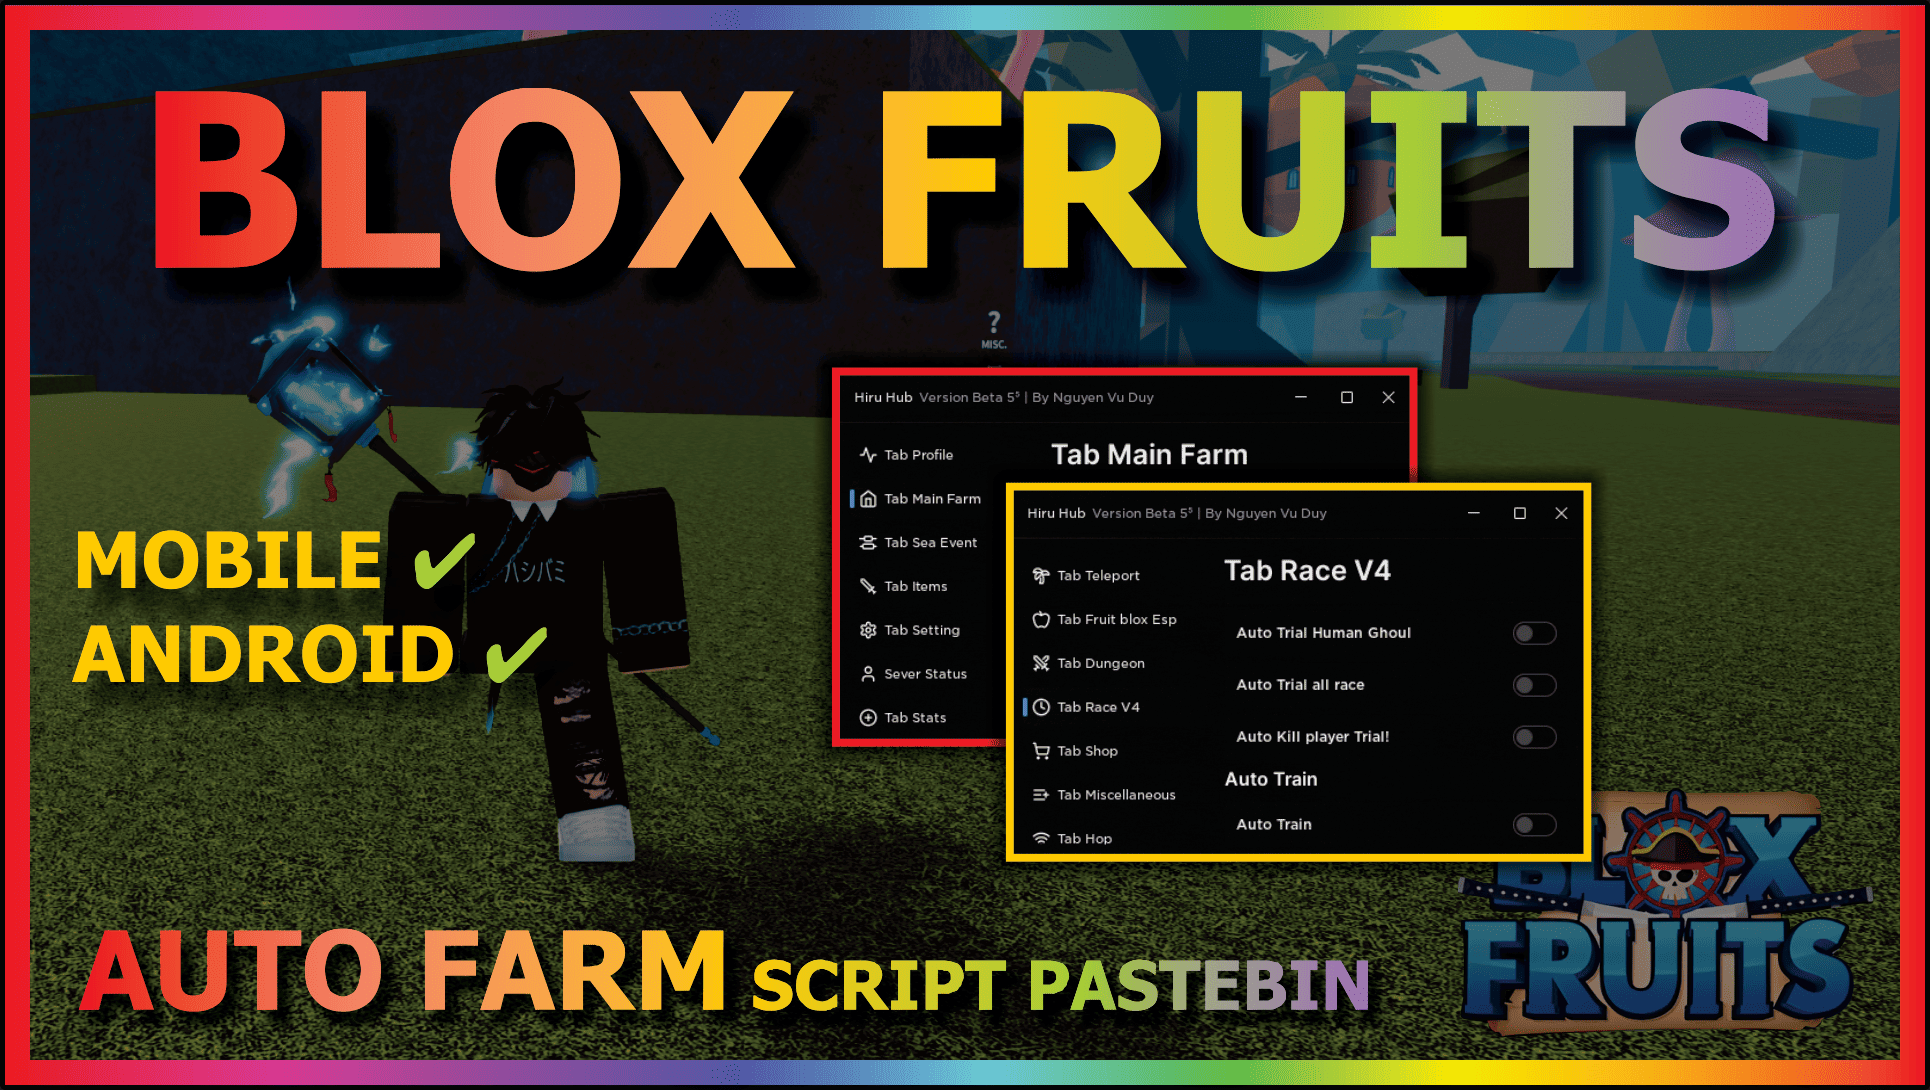 You are currently viewing BLOX FRUITS (HIRU)